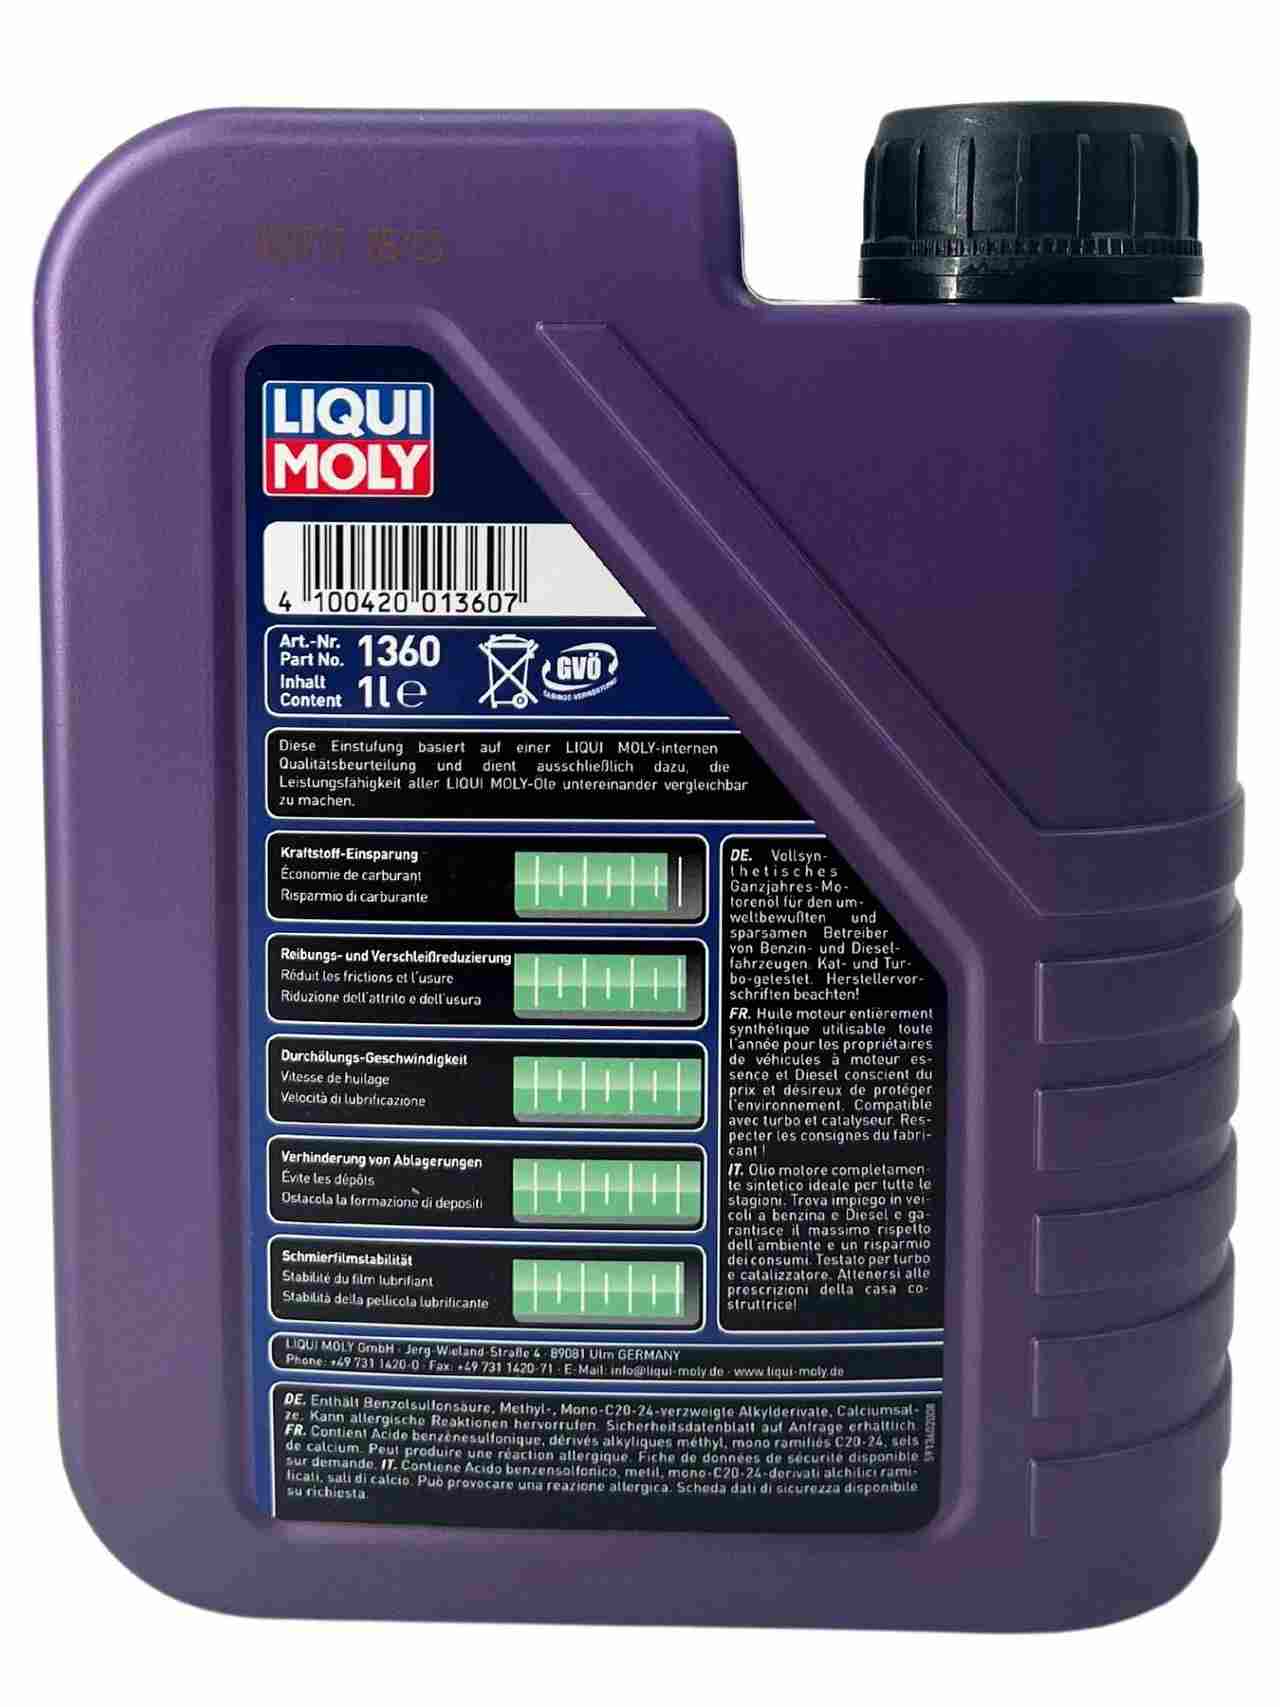 Liqui Moly Synthoil Energy 0W-40 1 Liter